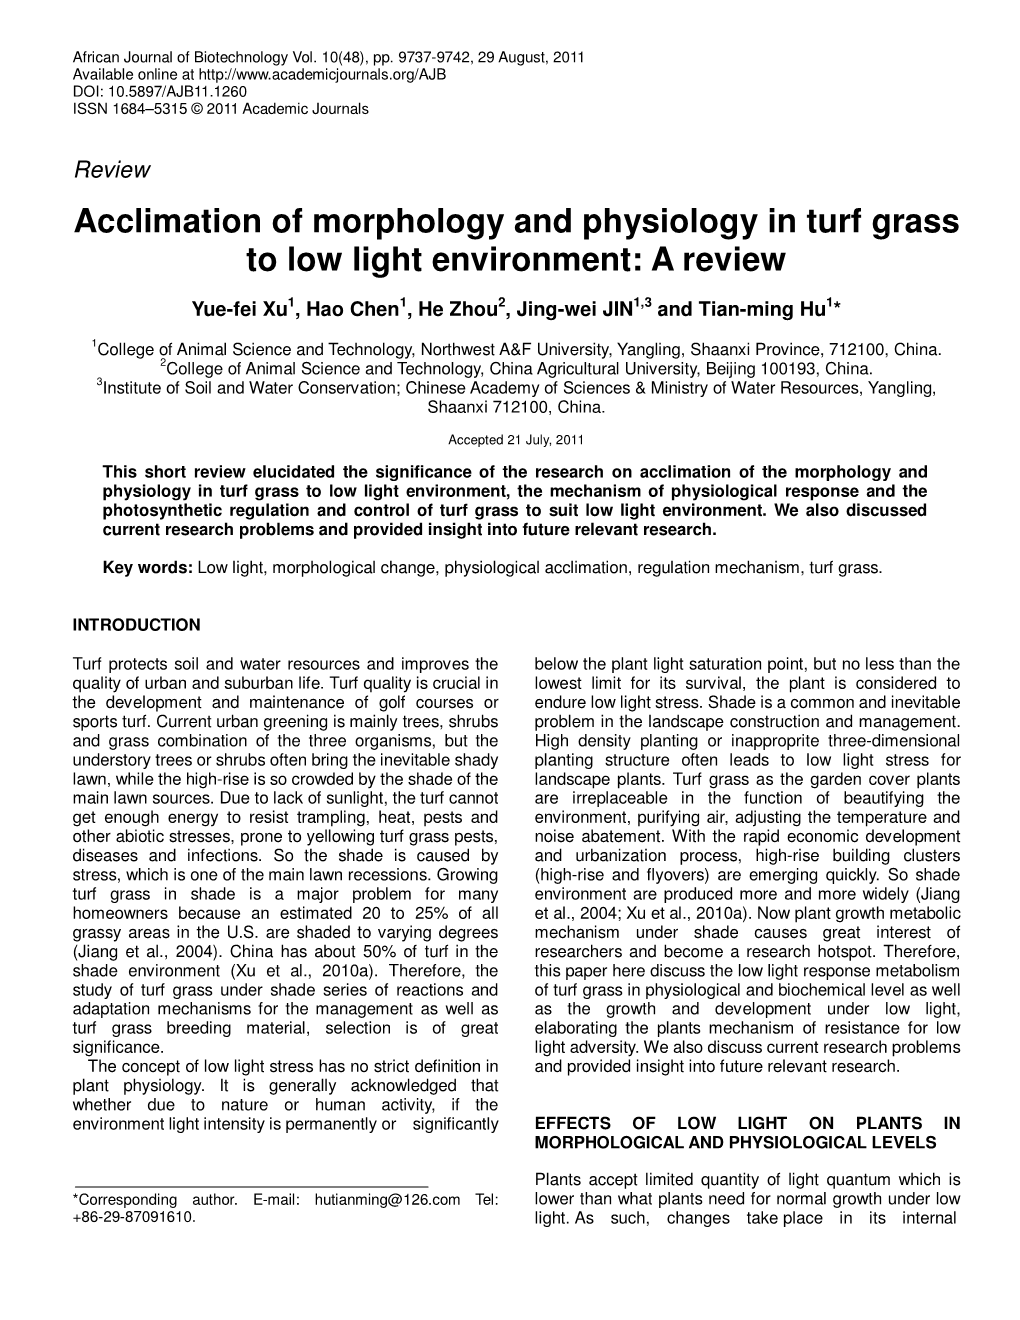 Acclimation of Morphology and Physiology in Turf Grass to Low Light Environment: a Review